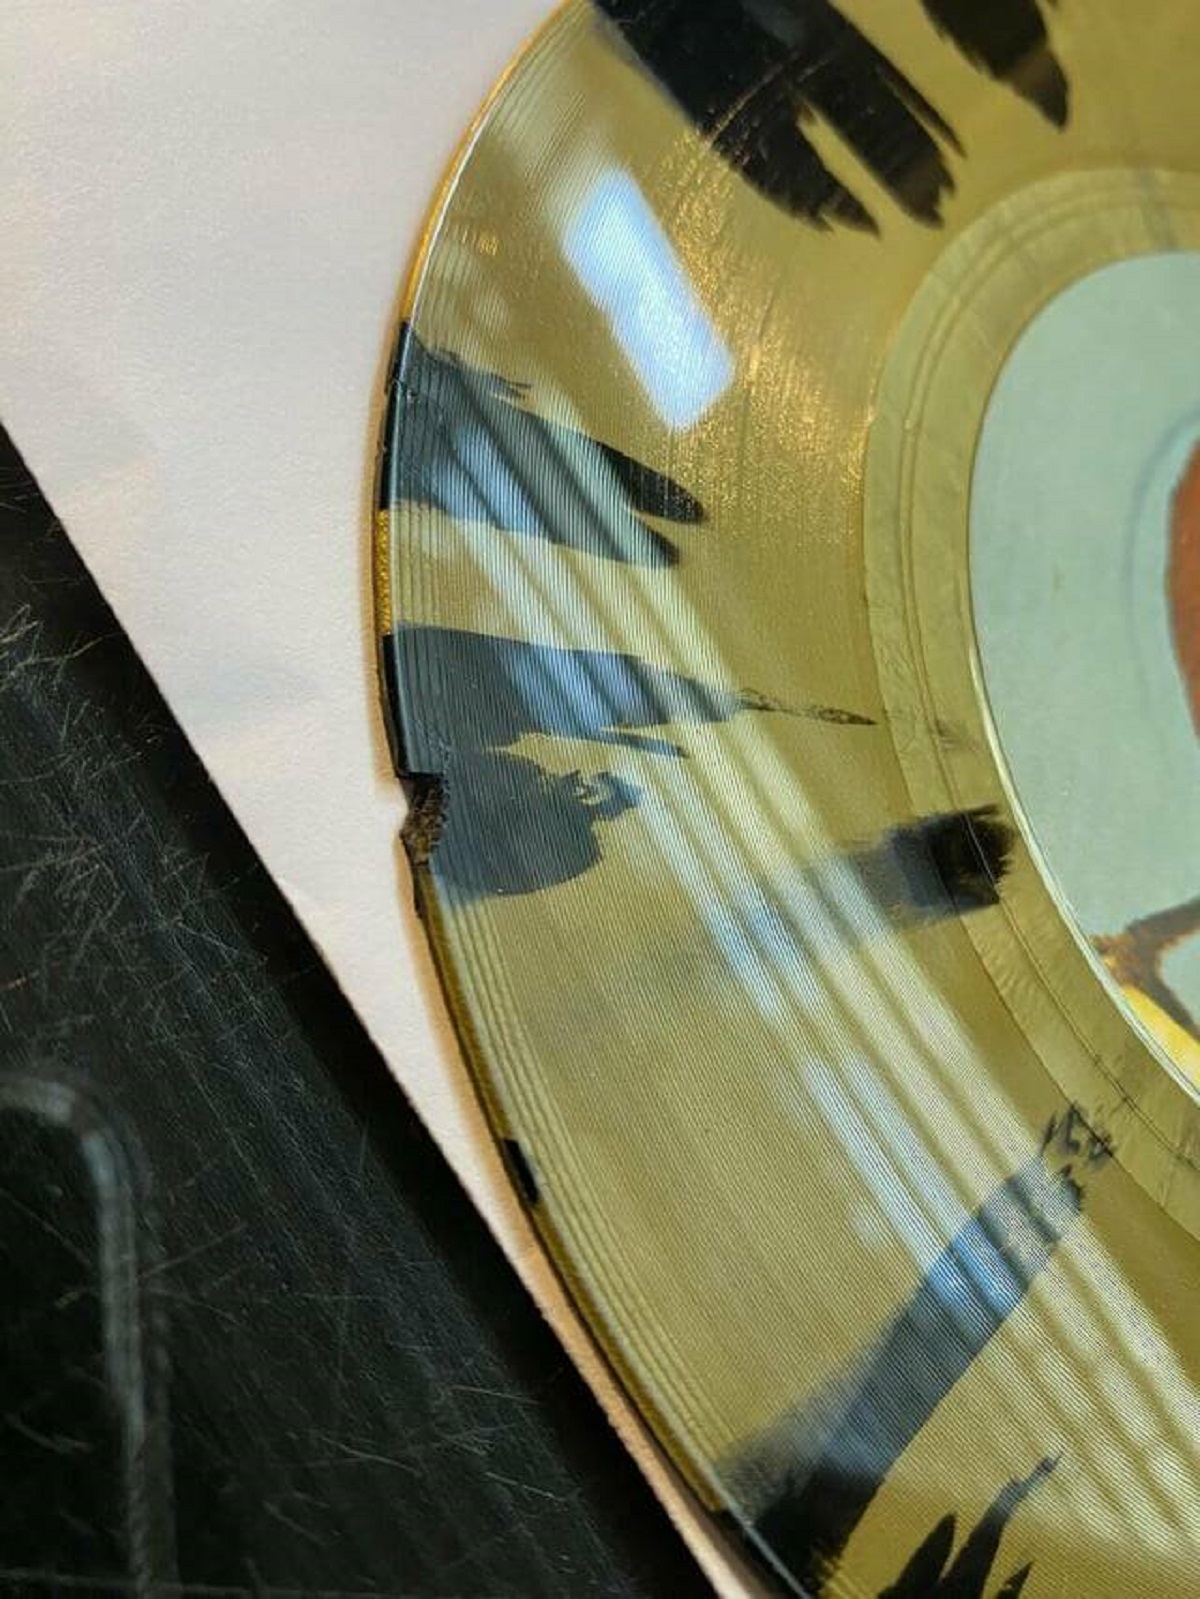 "My record showed up like this :("